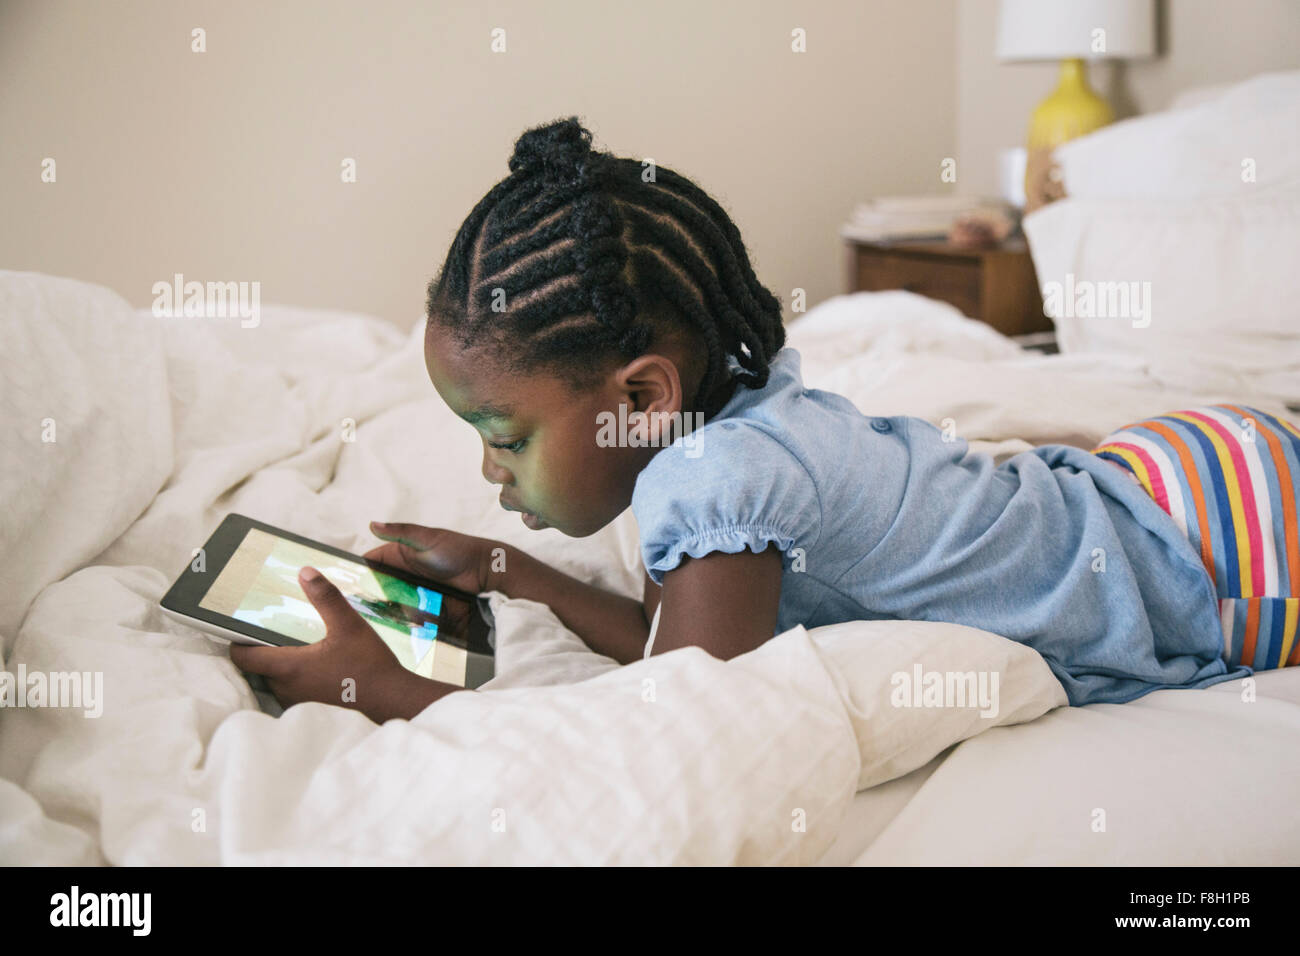 African American girl using digital tablet on bed Stock Photo